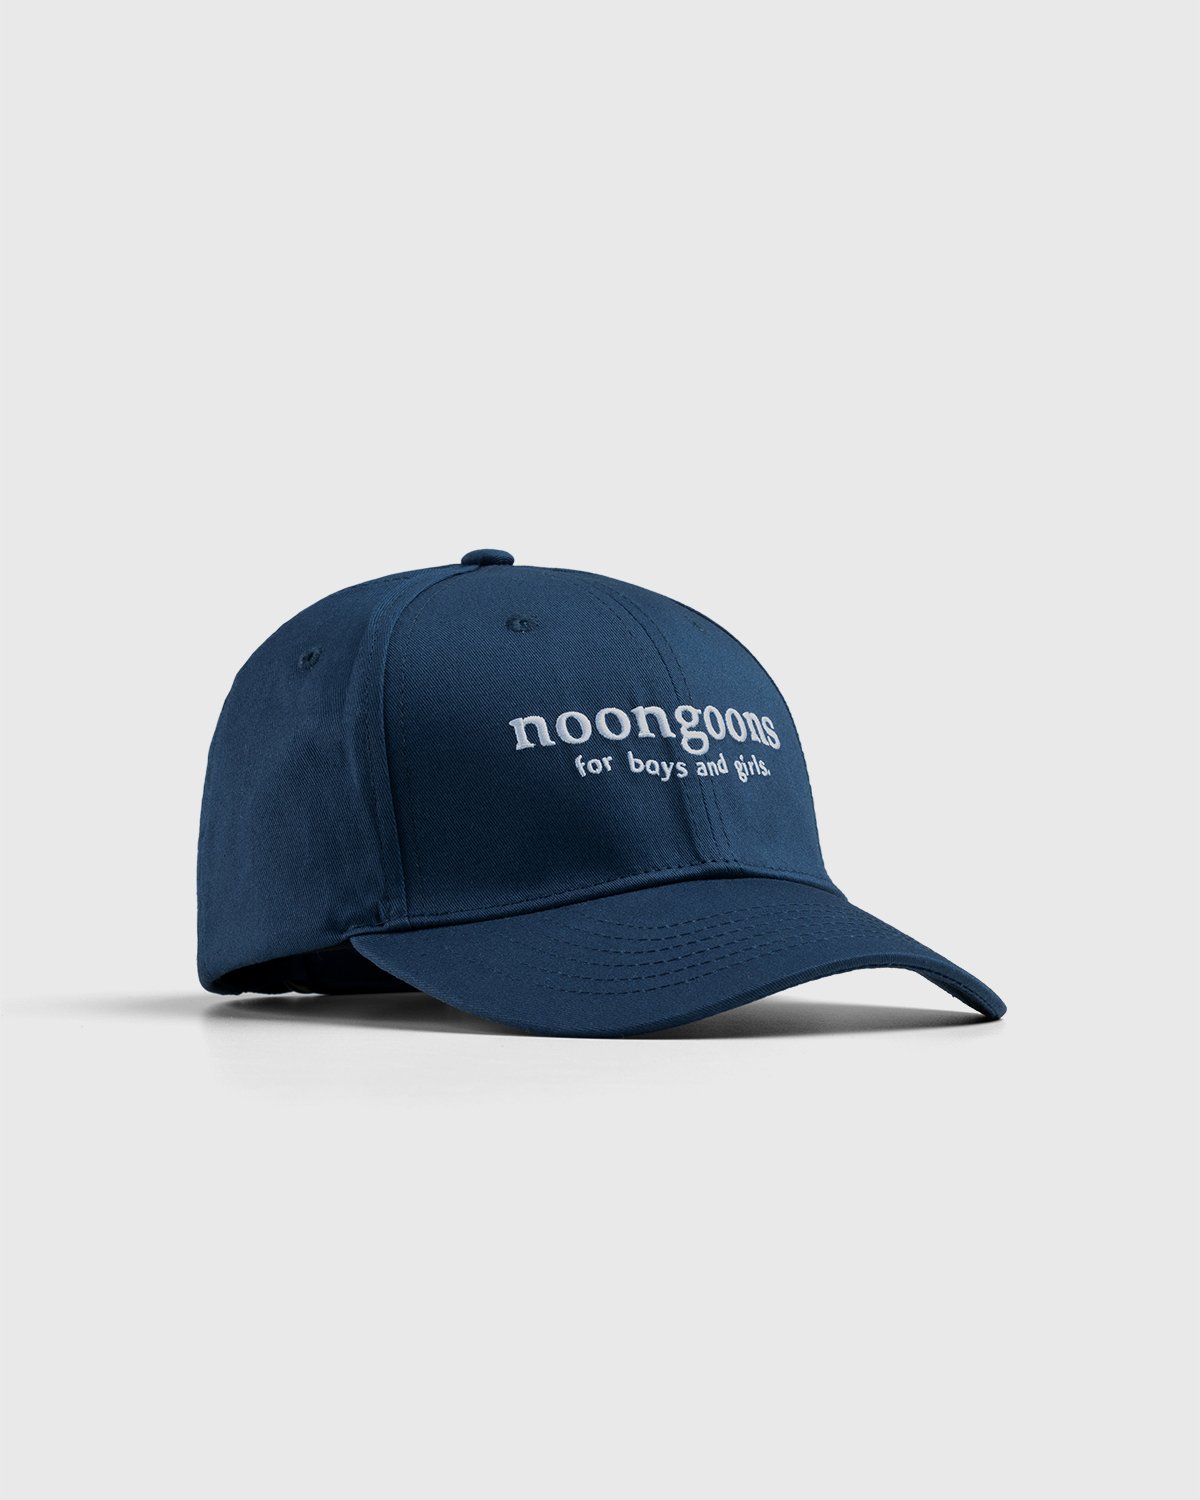 Noon Goons - Boys and Girls Hat Blue - Accessories - Blue - Image 1